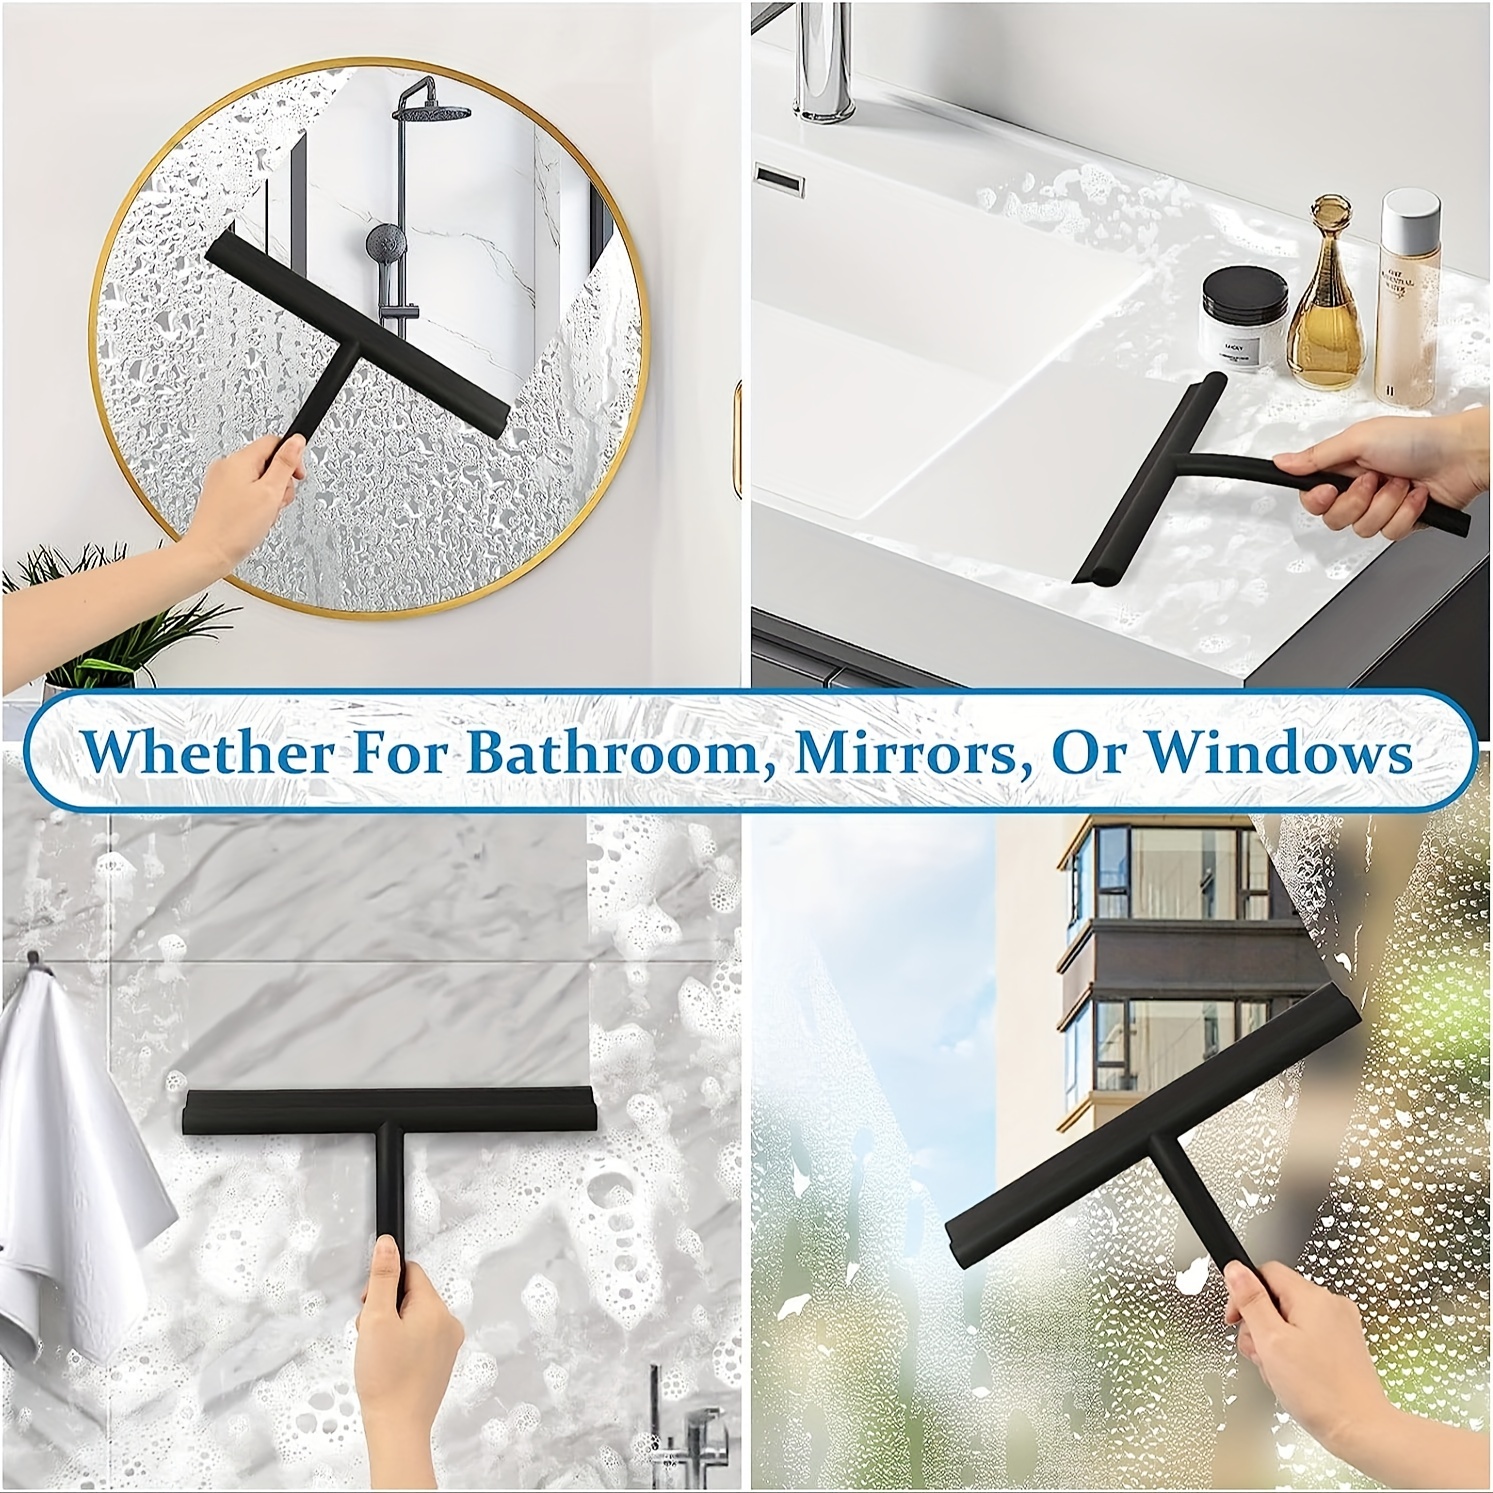 Shower Squeegee for Glass Doors Silicone Squeegee with Hook Bathroom Shower  Mirrors Tiles and Car Windows Streak Free Cleaning